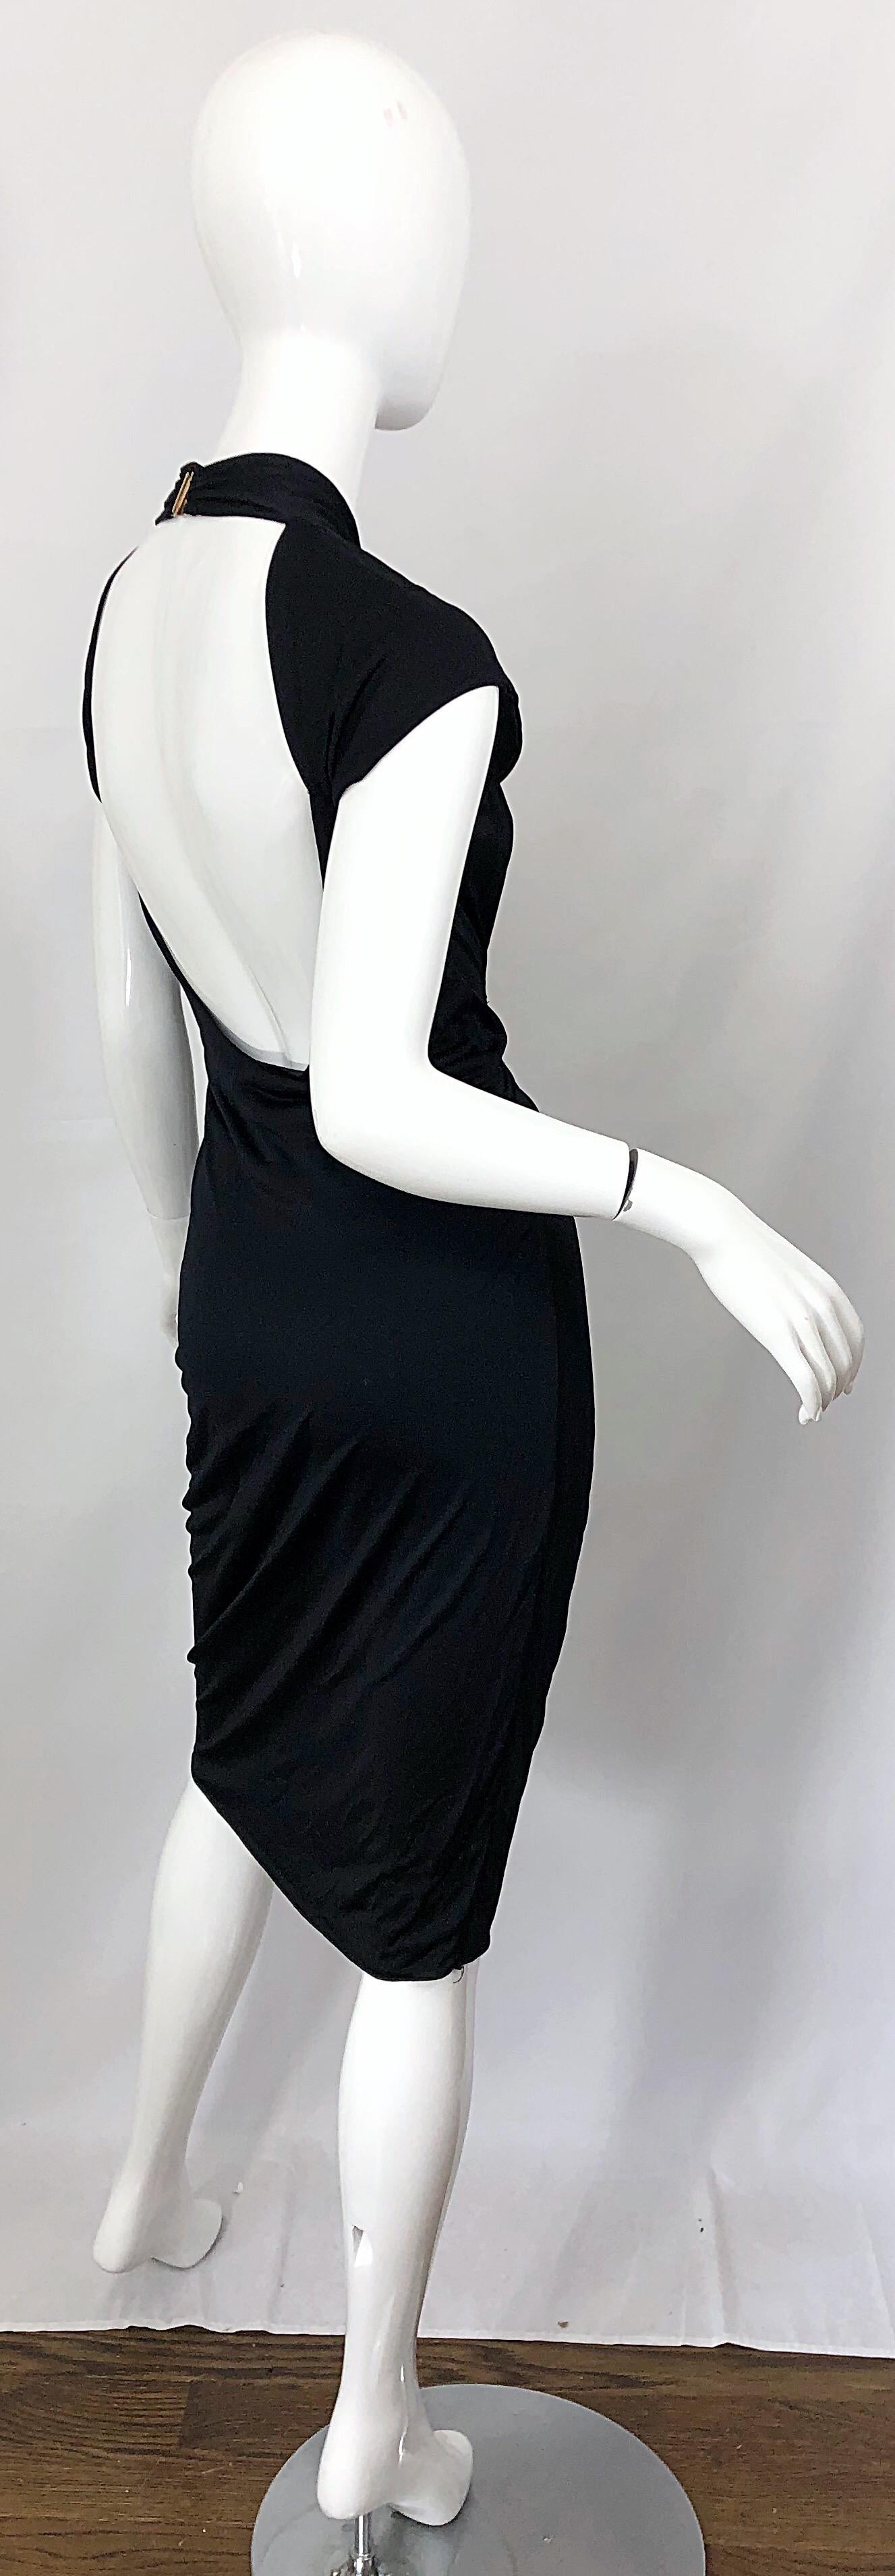 Gucci Tom Ford Fall 2003 Runway Black Cut Out Backless Stretch Jersey Dress  8